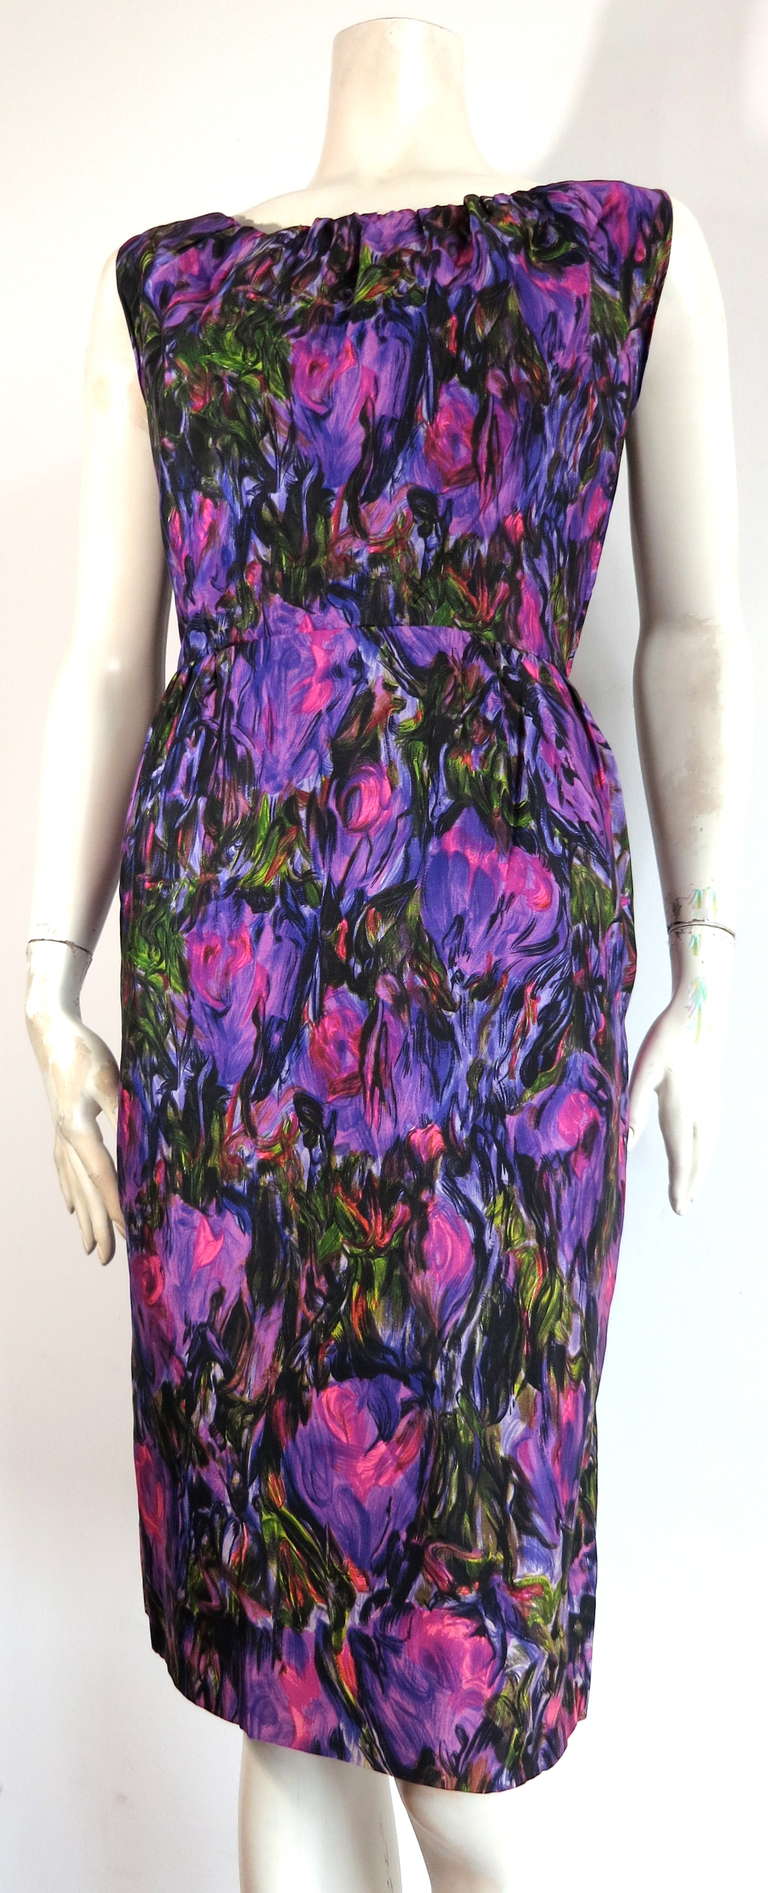 1961 CHRISTIAN DIOR NY Floral dress & jacket set In Excellent Condition For Sale In Newport Beach, CA